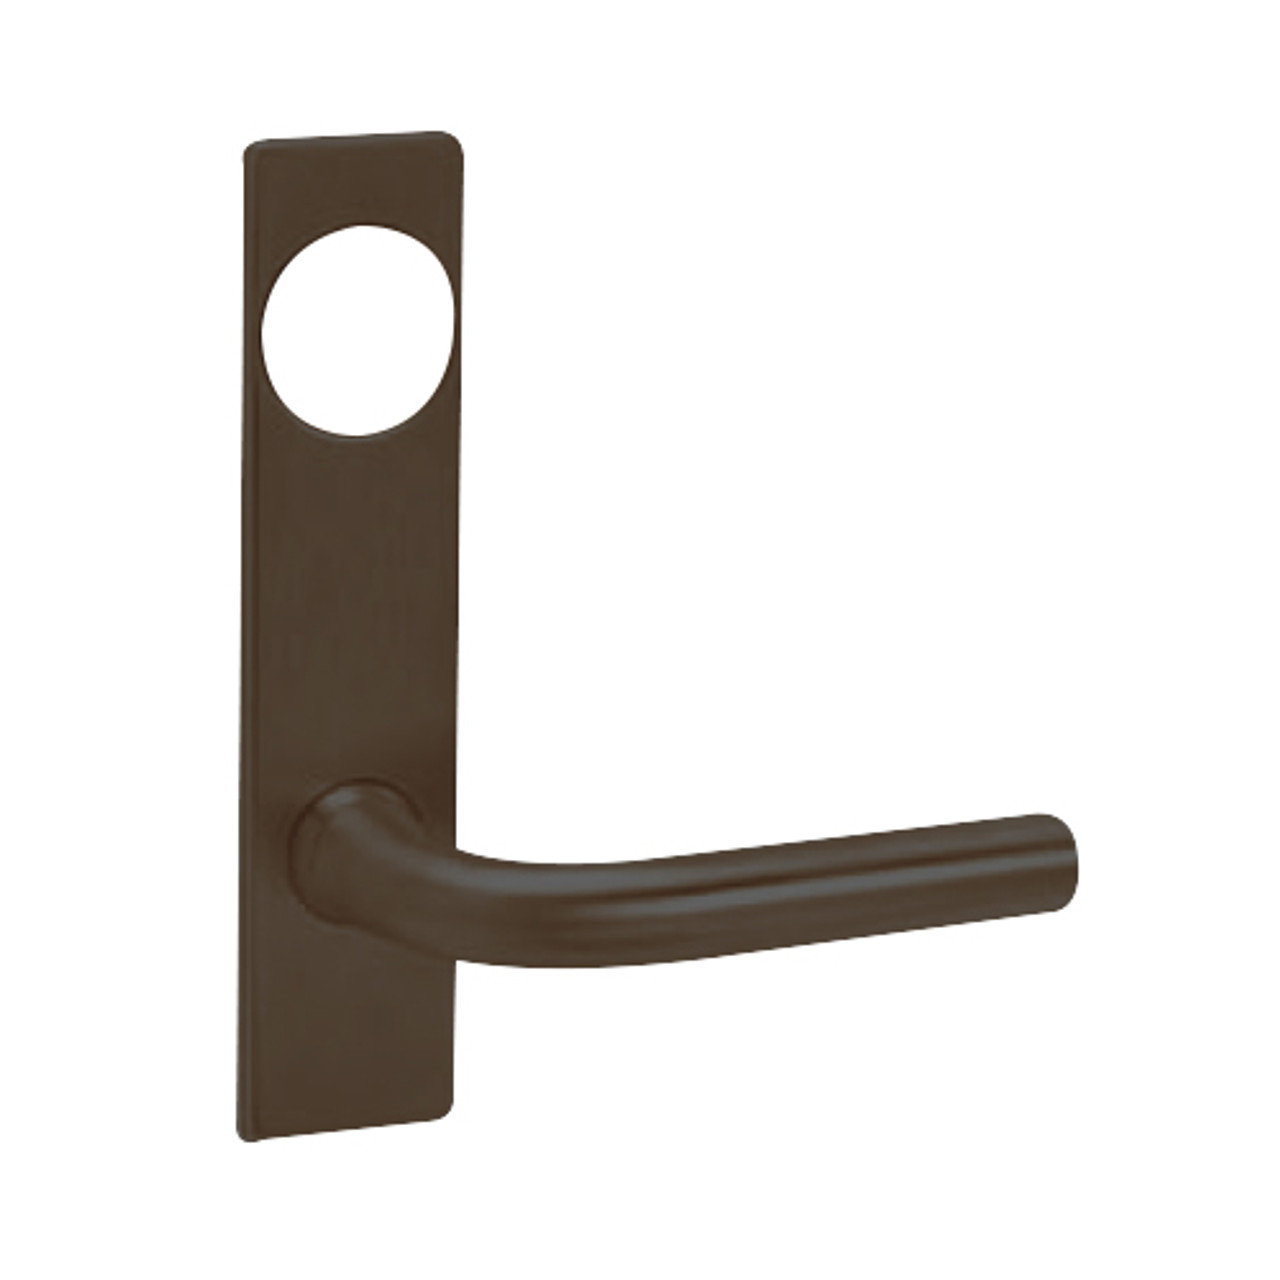 ML2029-RWP-613 Corbin Russwin ML2000 Series Mortise Hotel Locksets with Regis Lever and Deadbolt in Oil Rubbed Bronze